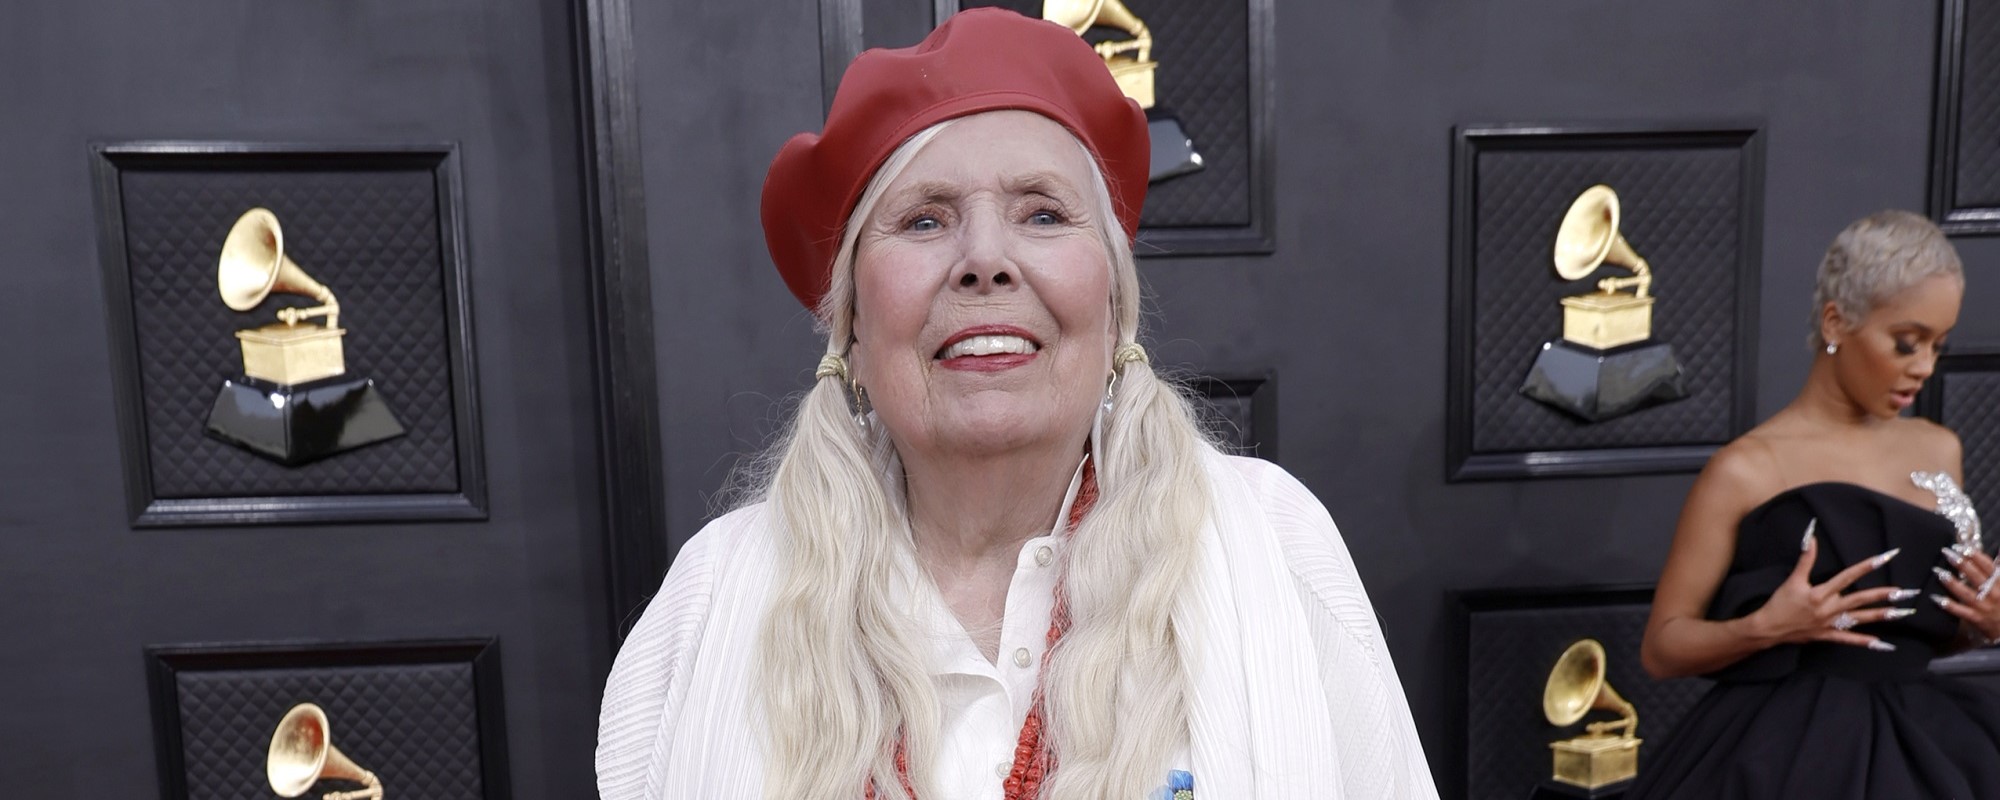 Joni Mitchell to Perform at the Grammys for First Time Ever; Fans Elated at the “Magic News”